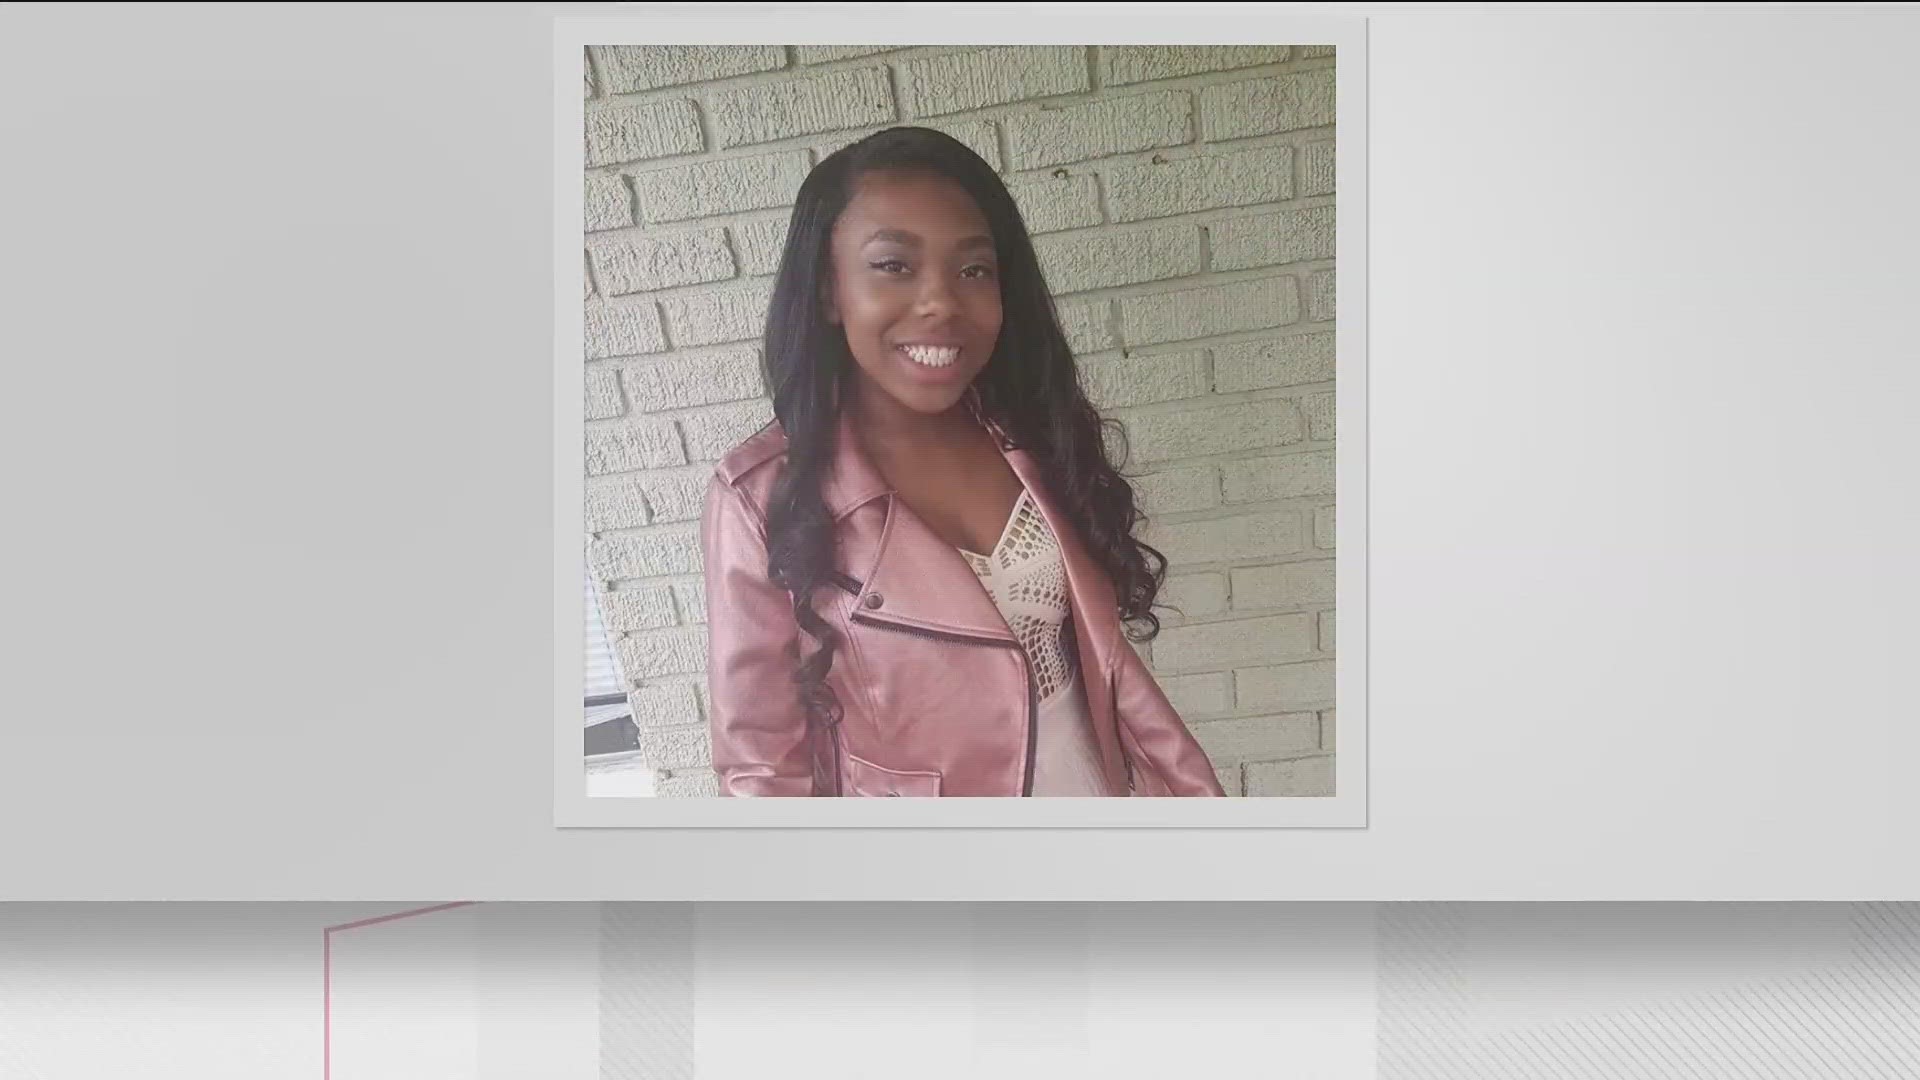 The sheriff's office announced the death of Noni Battiste-Kosoko at the Atlanta City Detention Center on July 12.